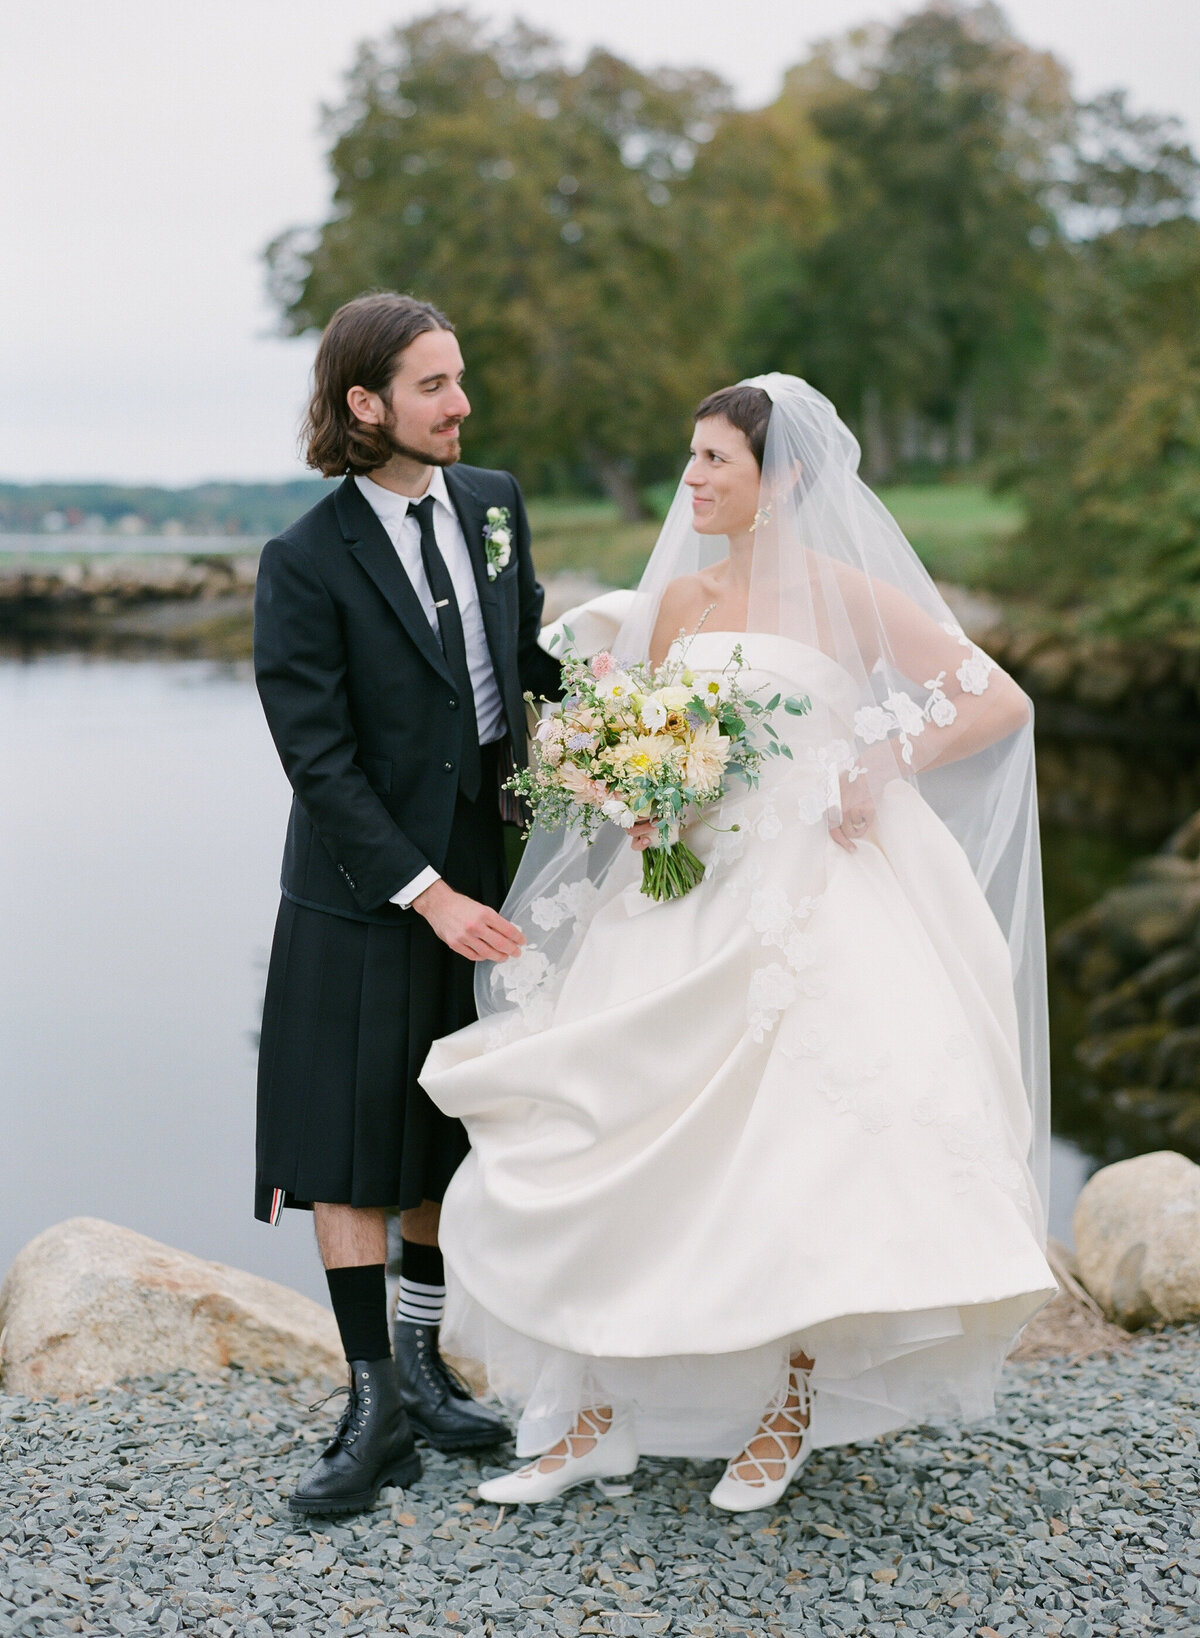 Jacqueline Anne Photography - Halifax Wedding Photographer - Lizzie and Miles-59